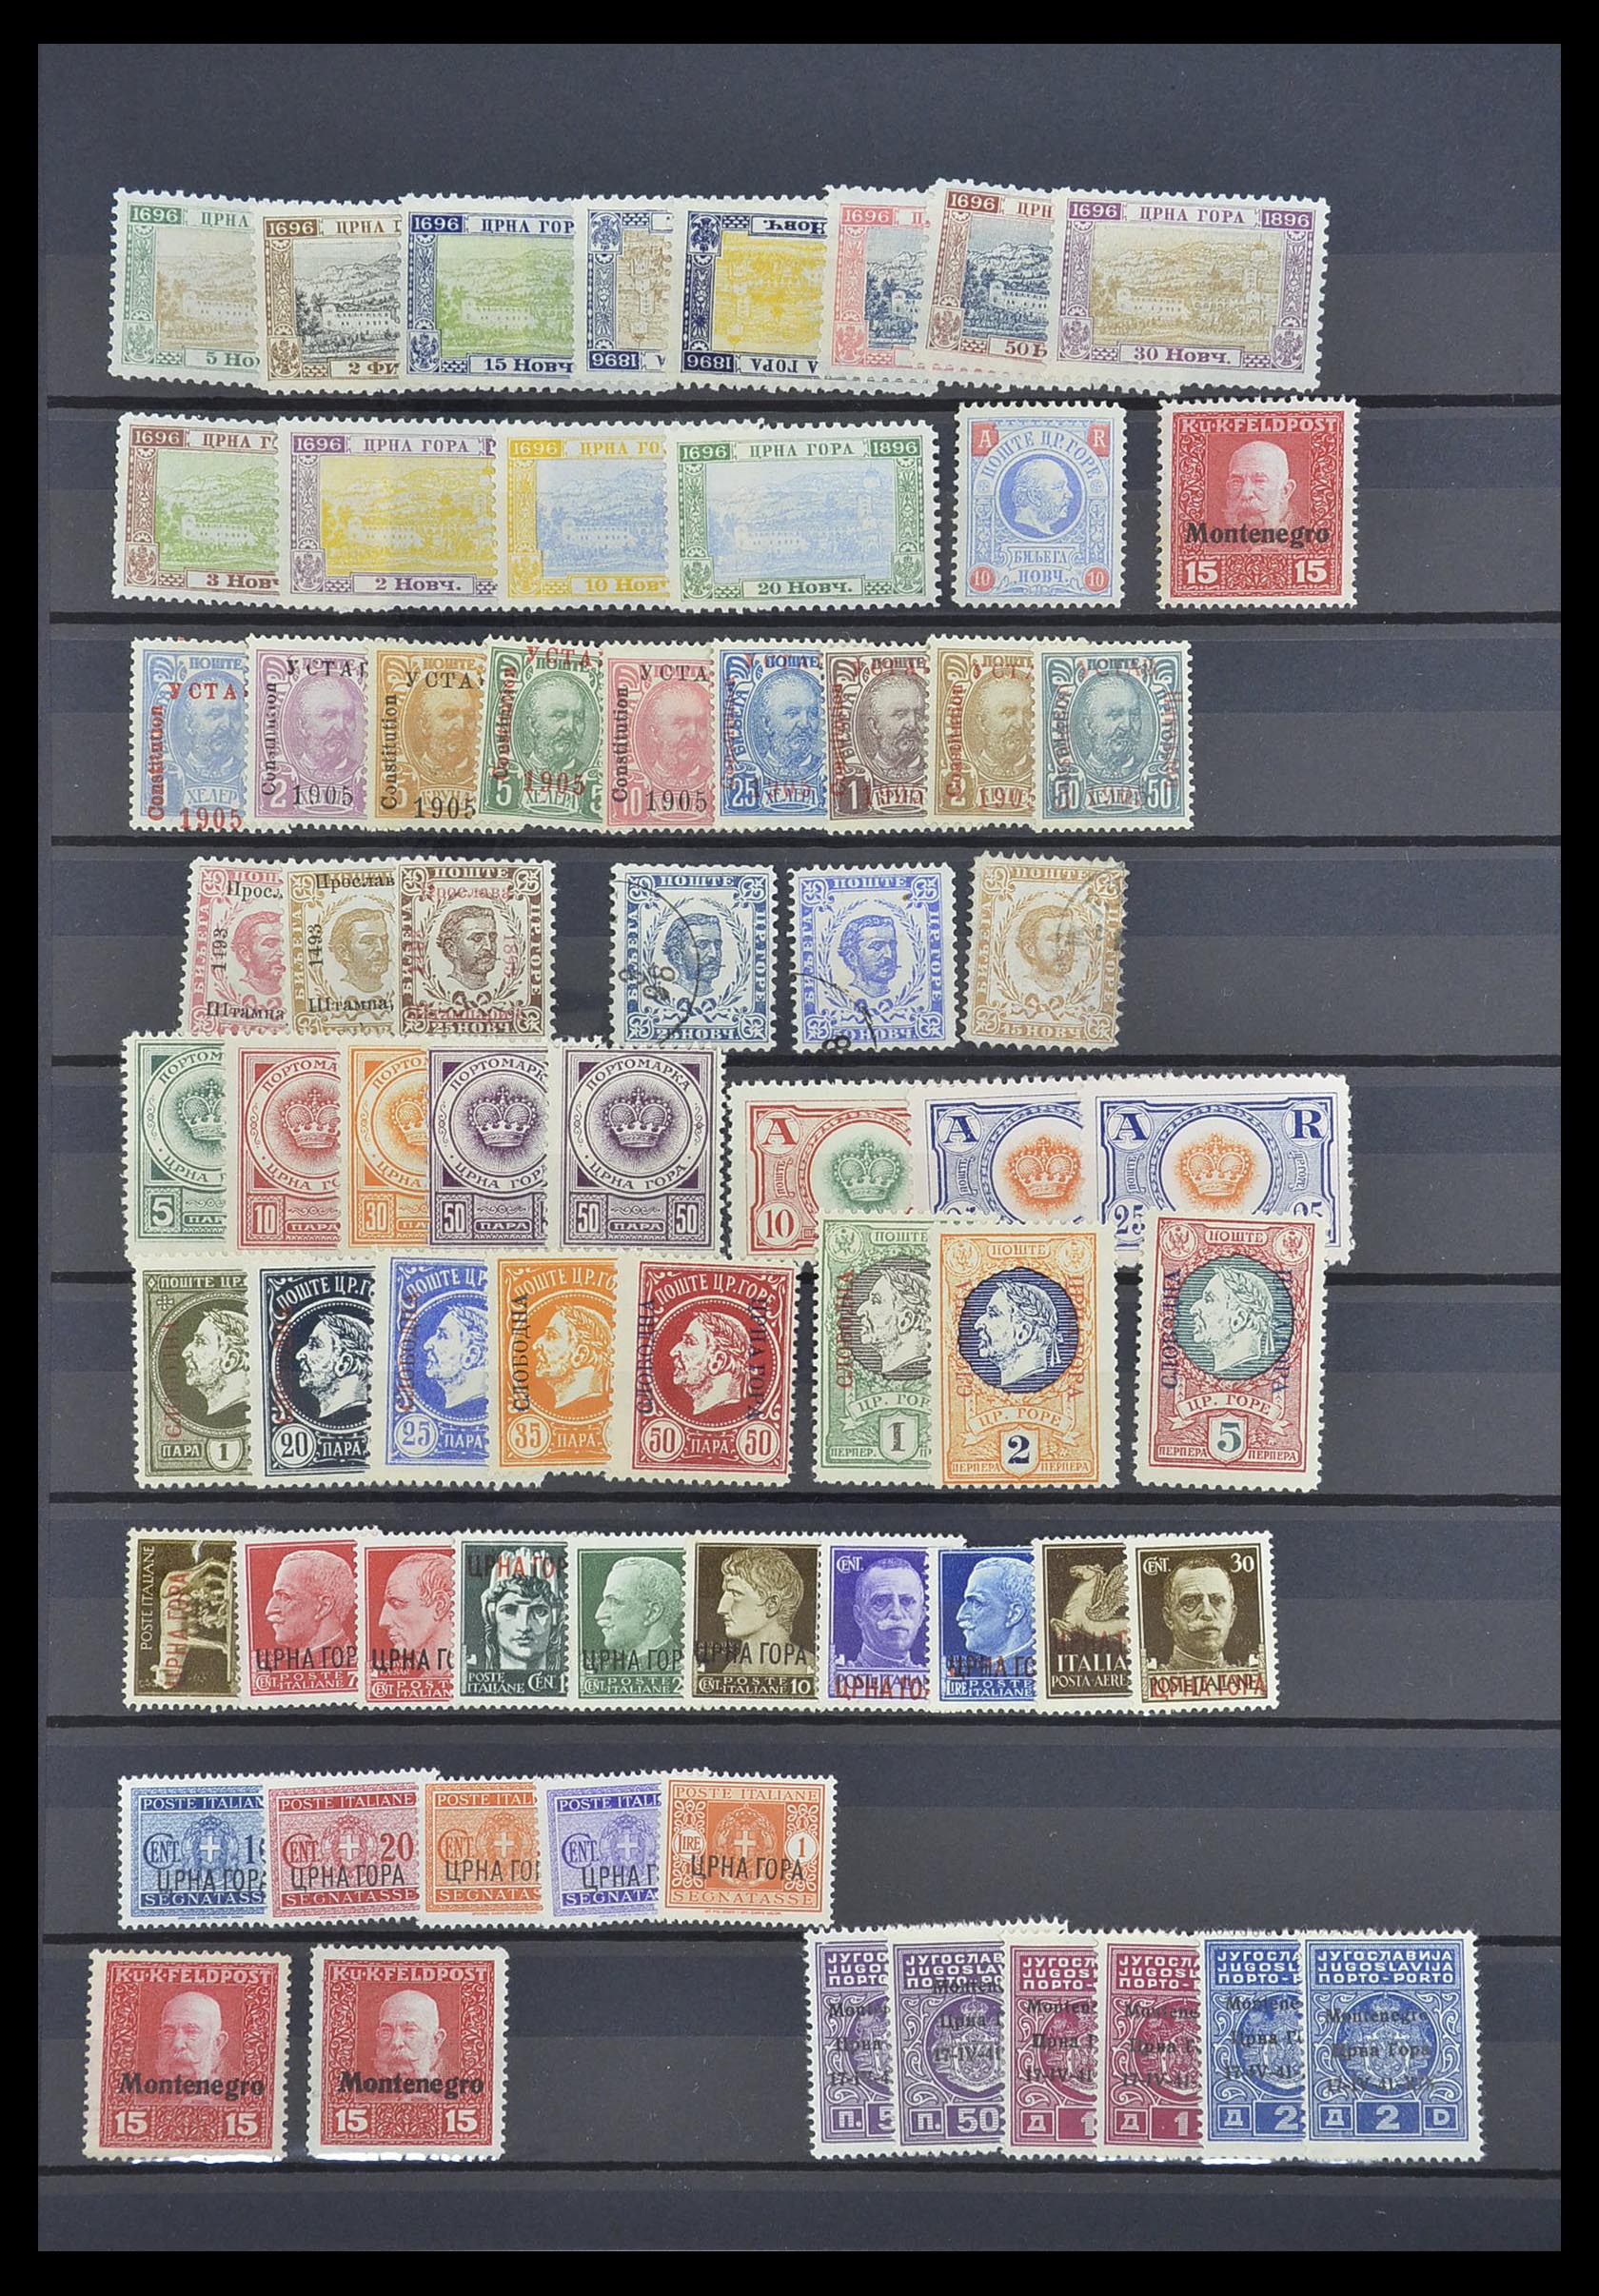 33756 074 - Stamp collection 33756 World classic 1850-1930.